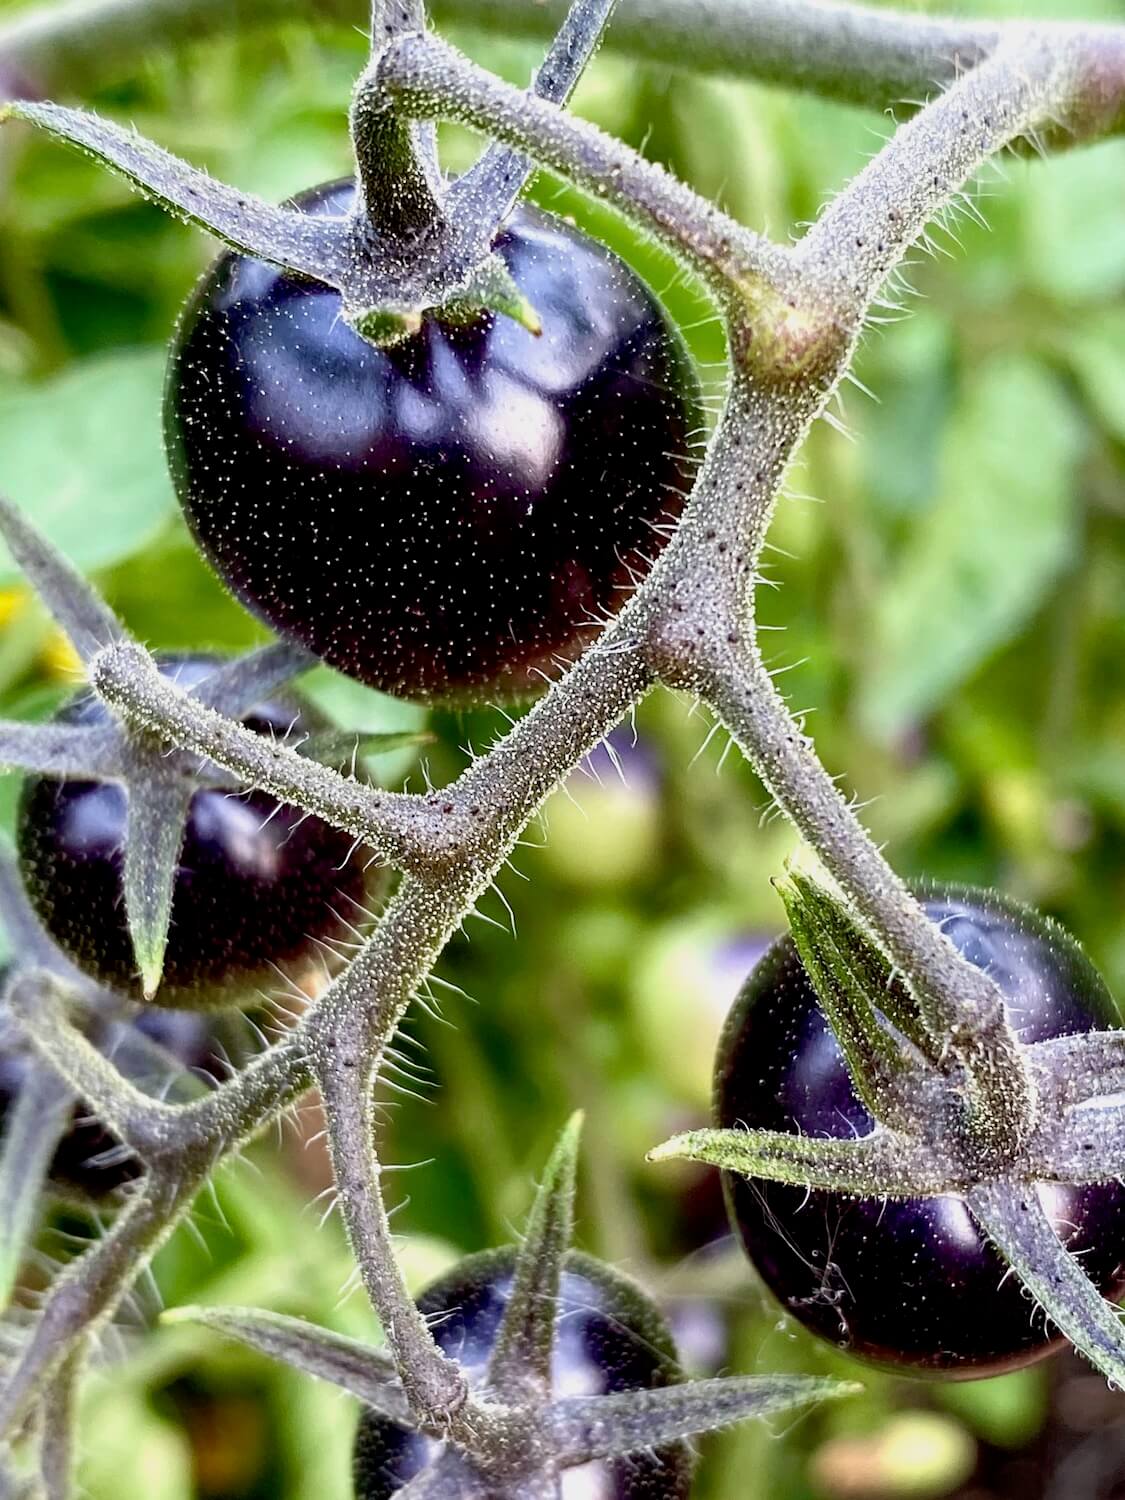 An extreme closeup of rich colored purple cherry tomatoes ripe but still clinging to the vine. The tiny fuzz of the vines are on display as well as the out of focus green foliage in the background of the garden scene.